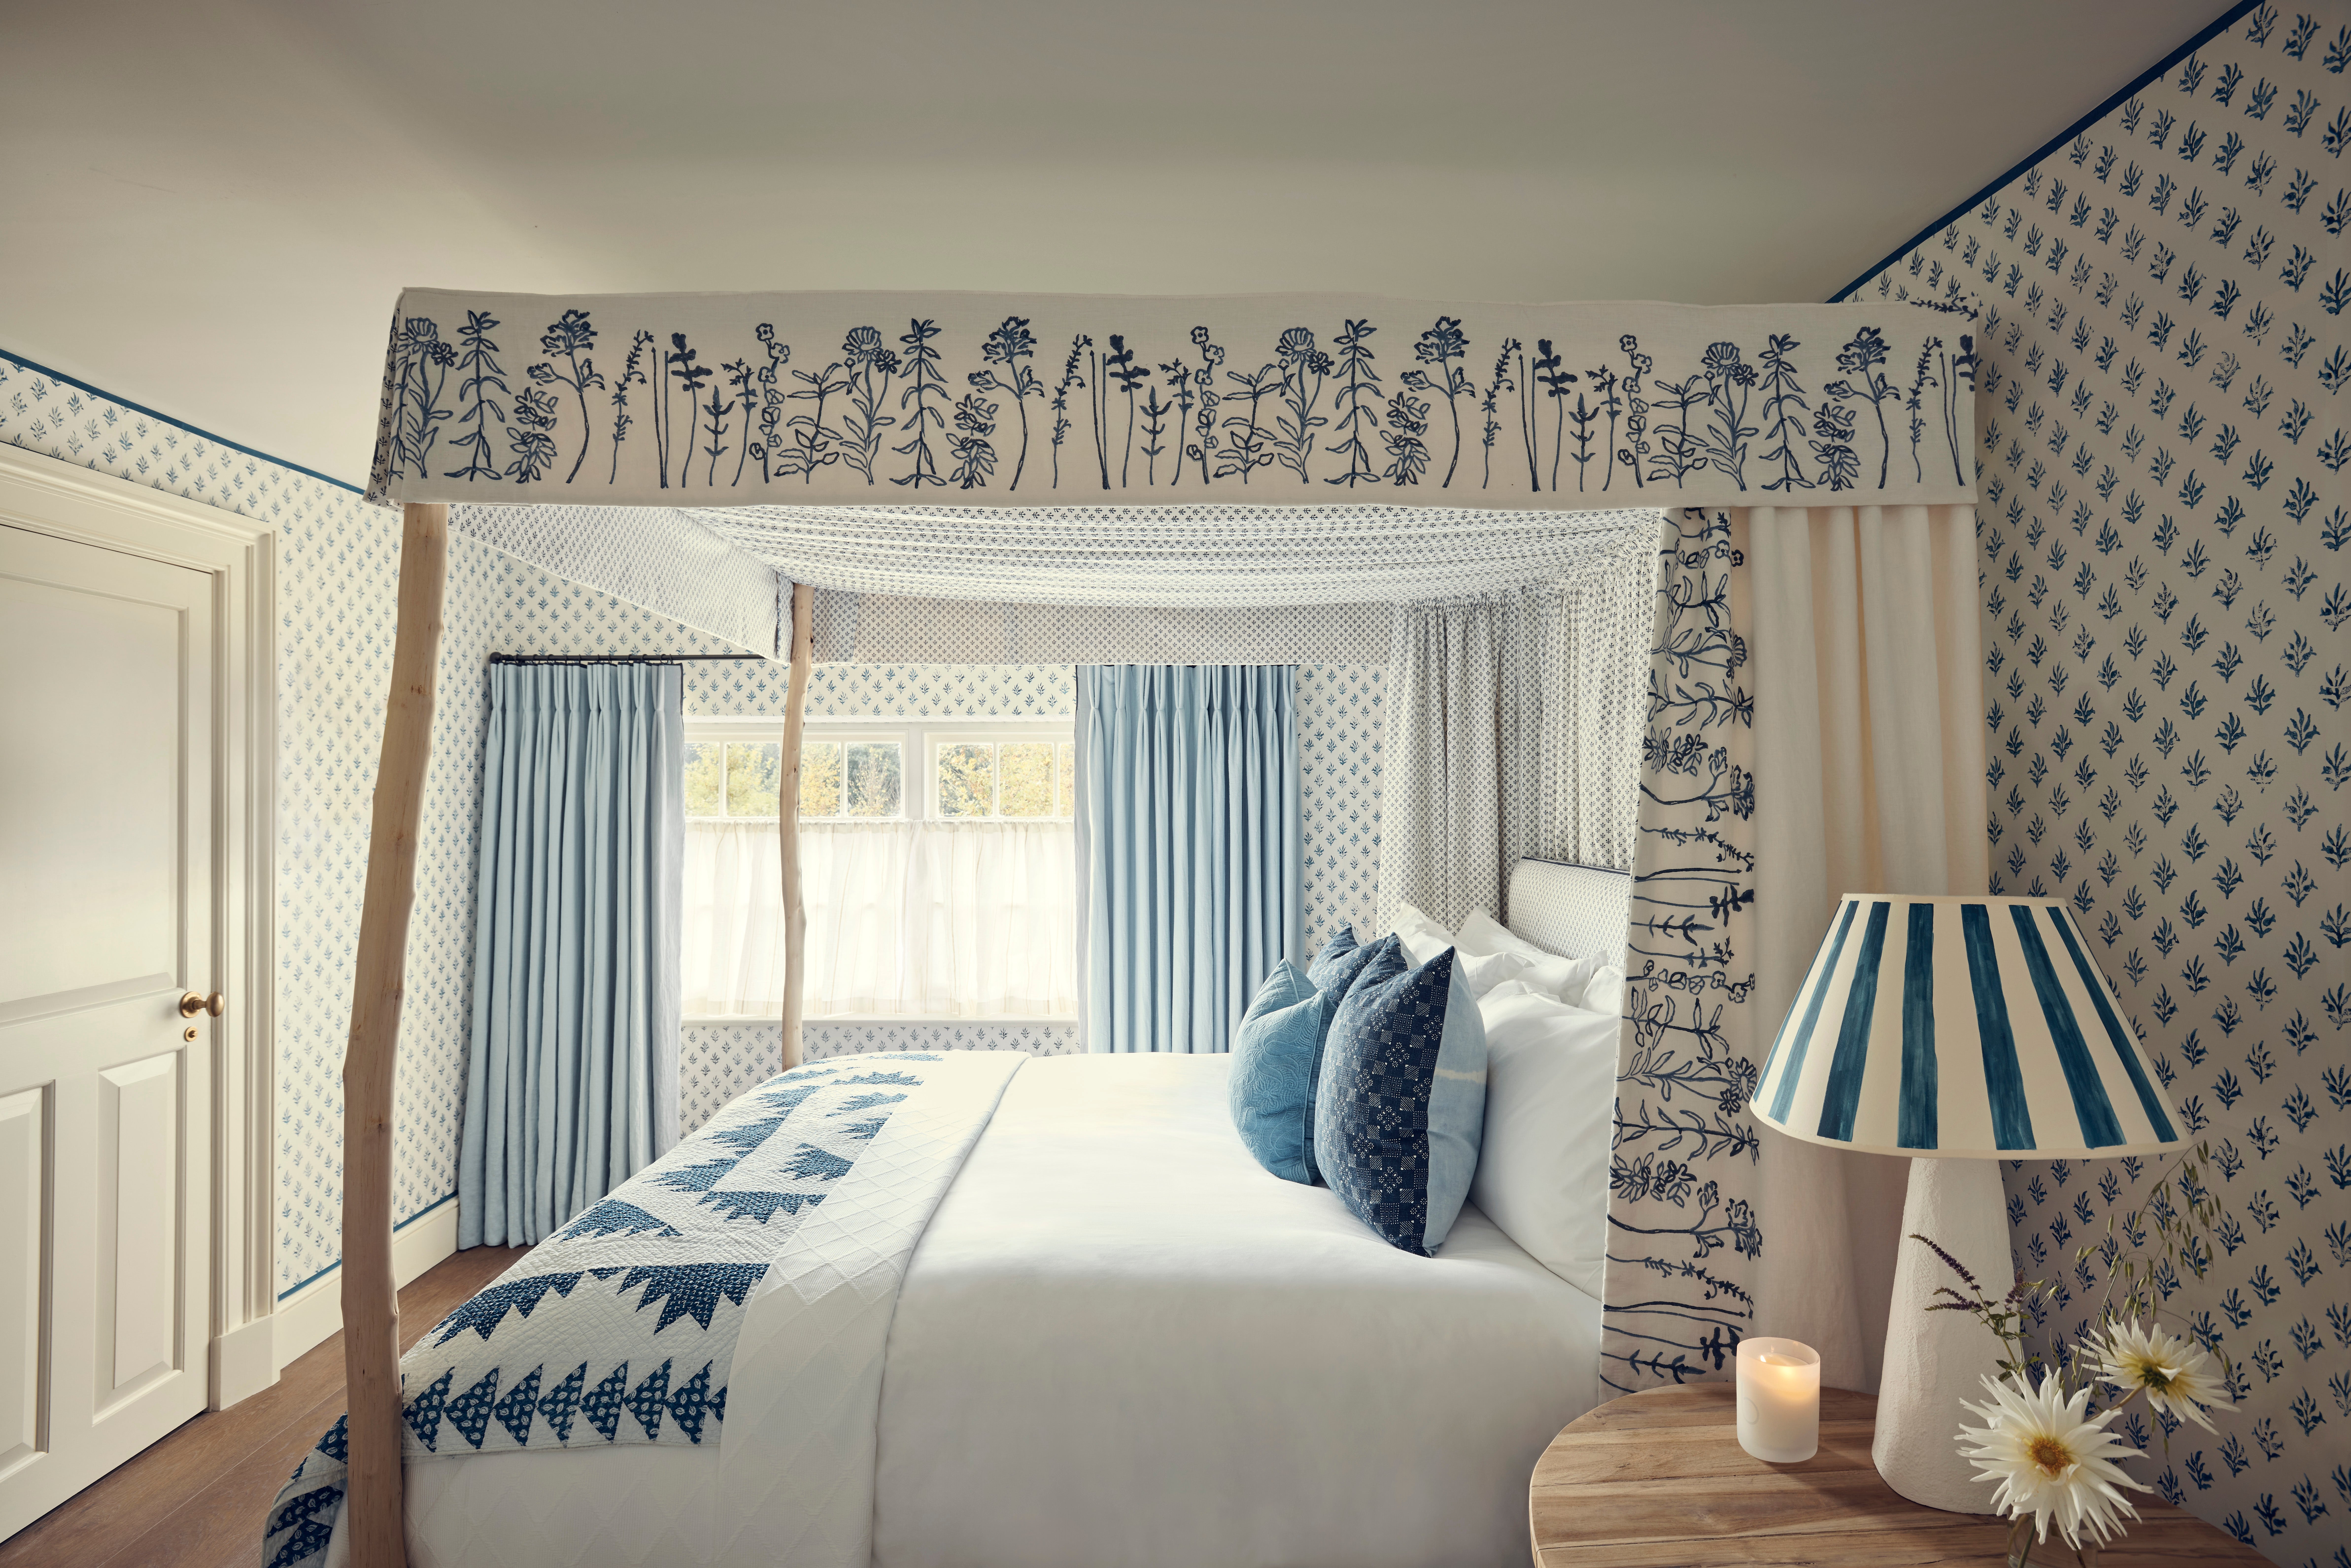 Inky blue accents, bloom-patterned pelmets and four-poster beds adorn The Bell’s bedrooms